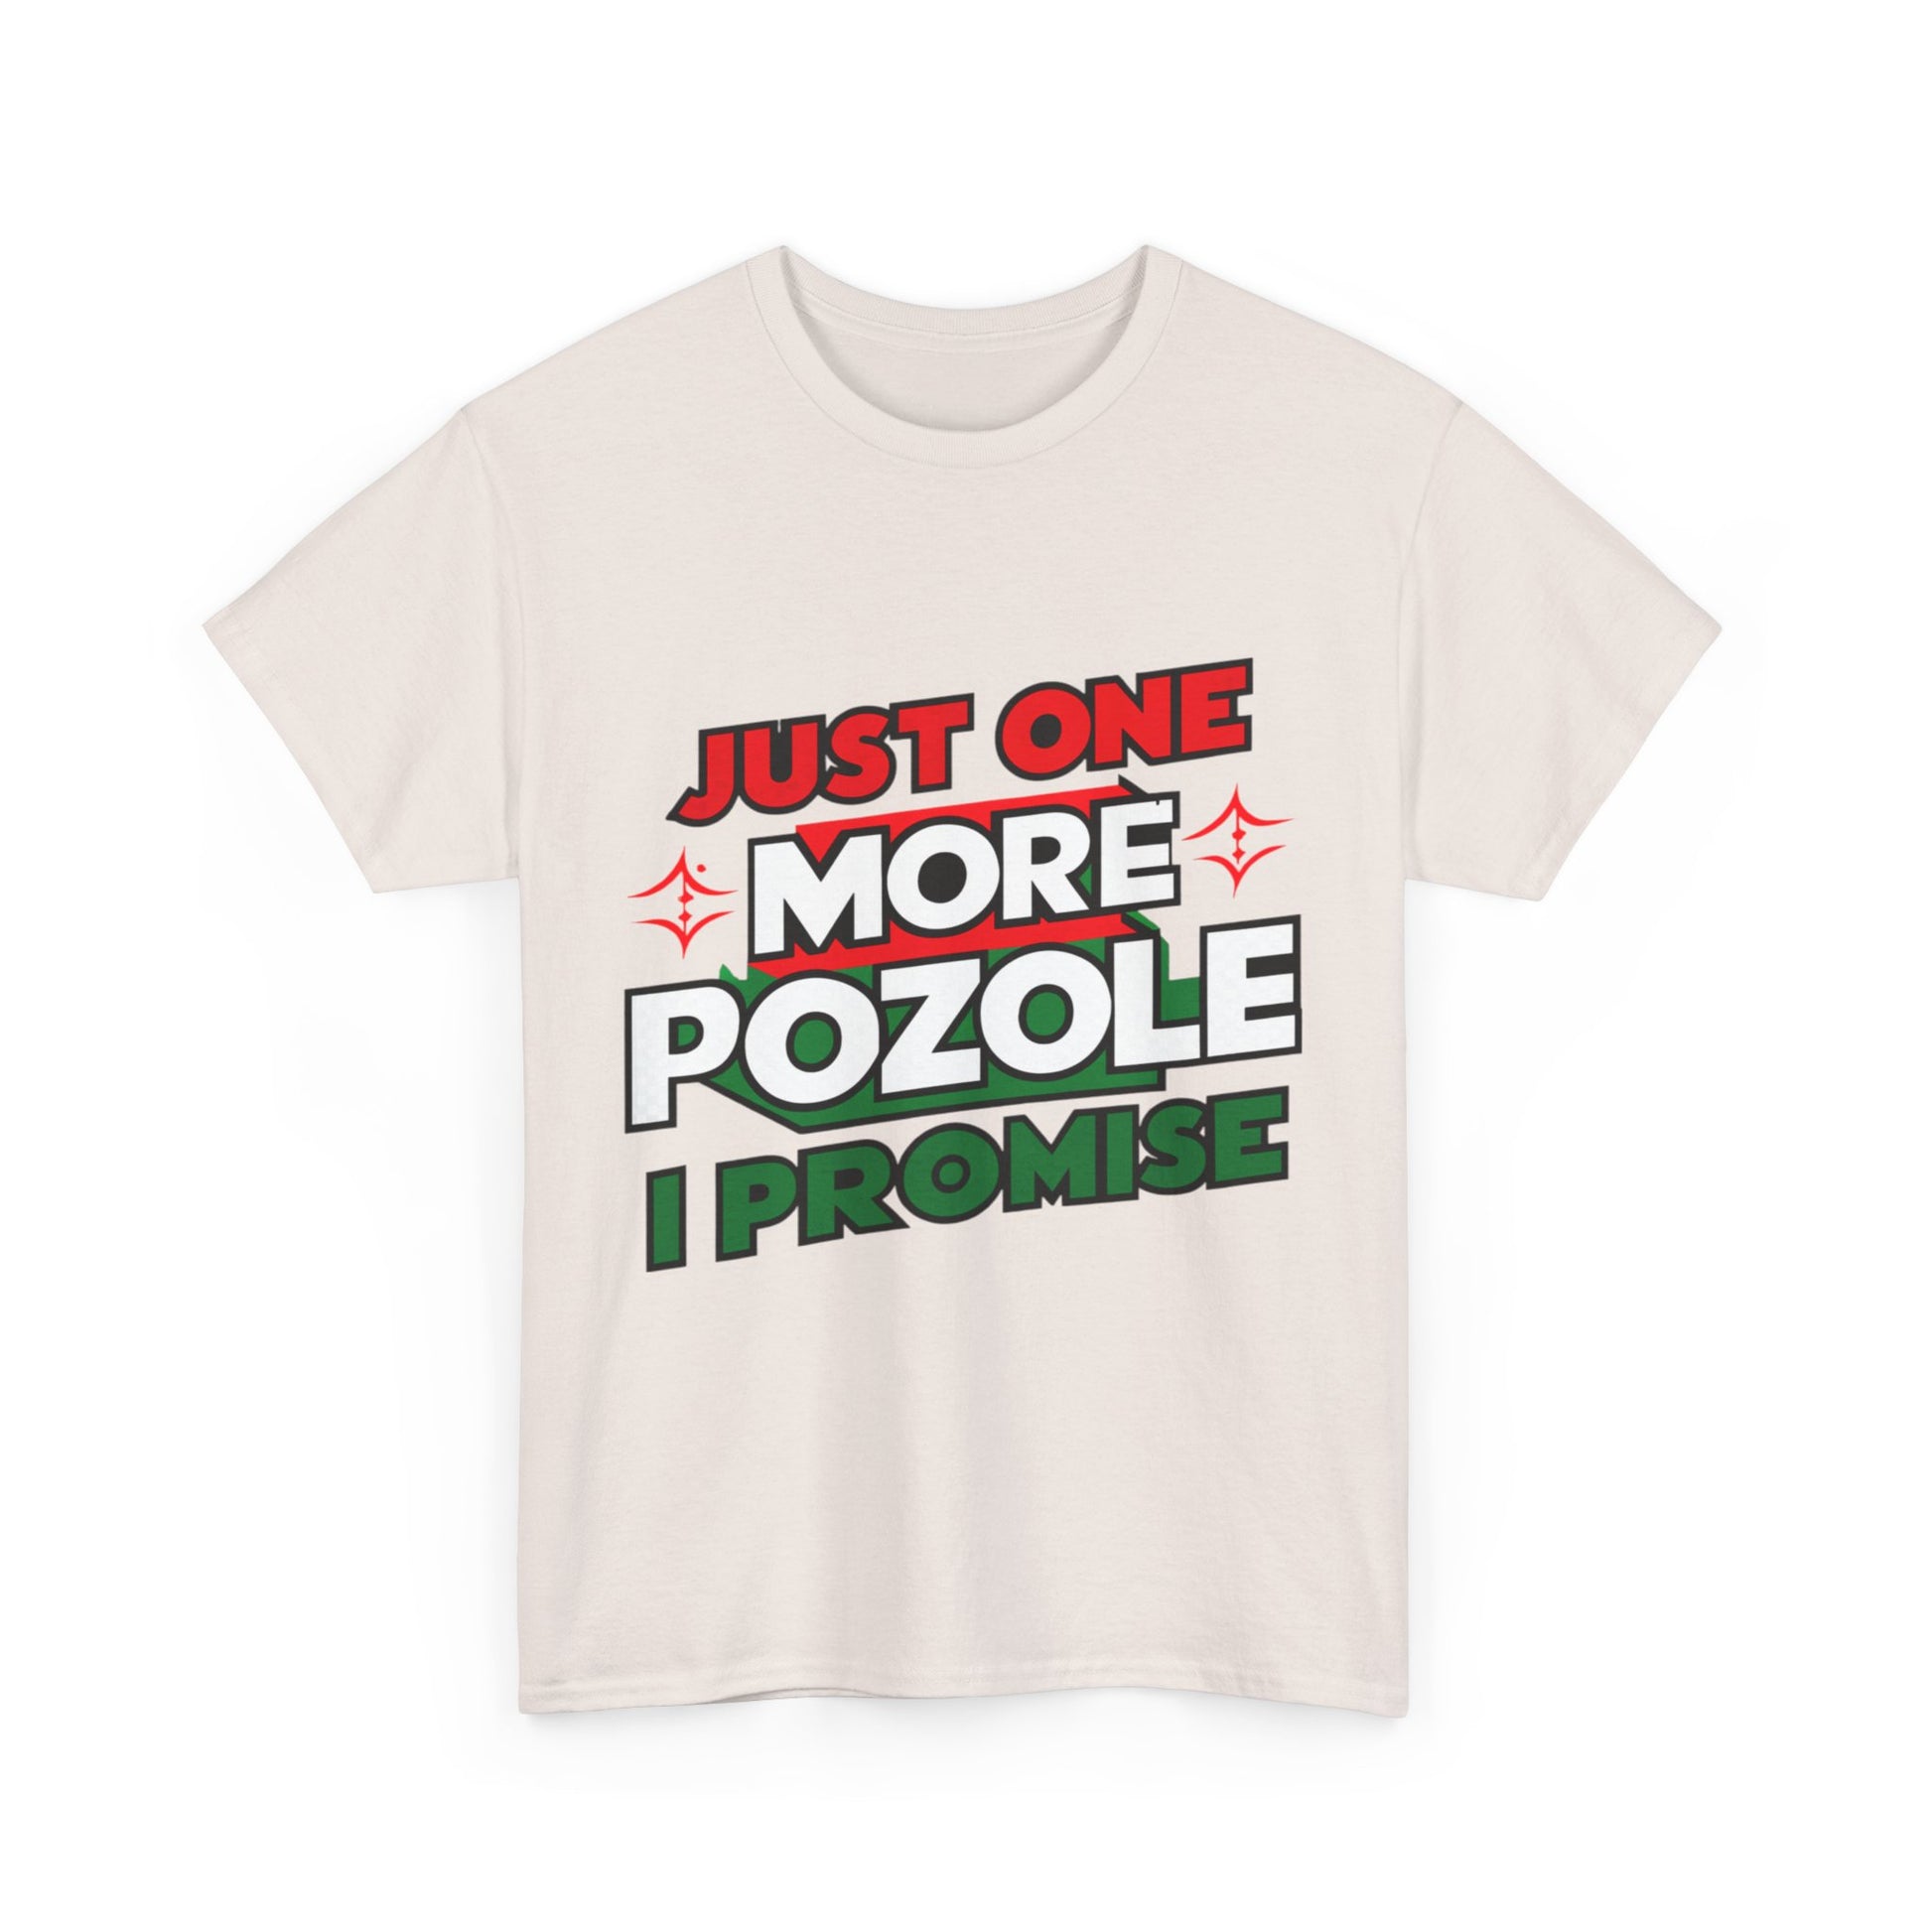 Just One More Pozole I Promise Mexican Food Graphic Unisex Heavy Cotton Tee Cotton Funny Humorous Graphic Soft Premium Unisex Men Women Ice Gray T-shirt Birthday Gift-48